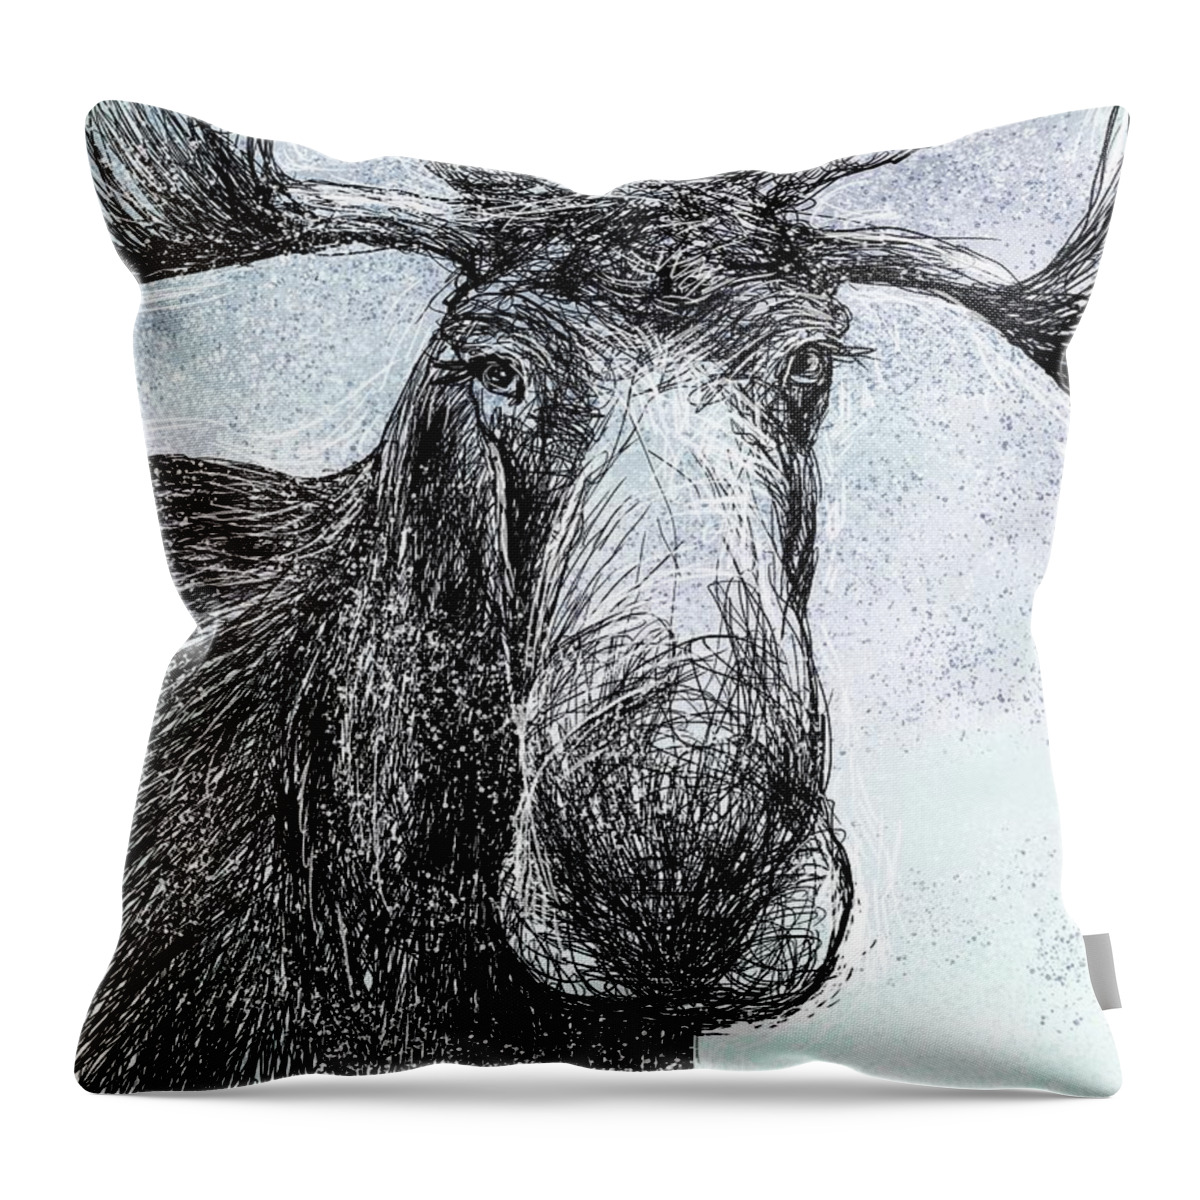 Moose Throw Pillow featuring the digital art Maine Moose by AnneMarie Welsh